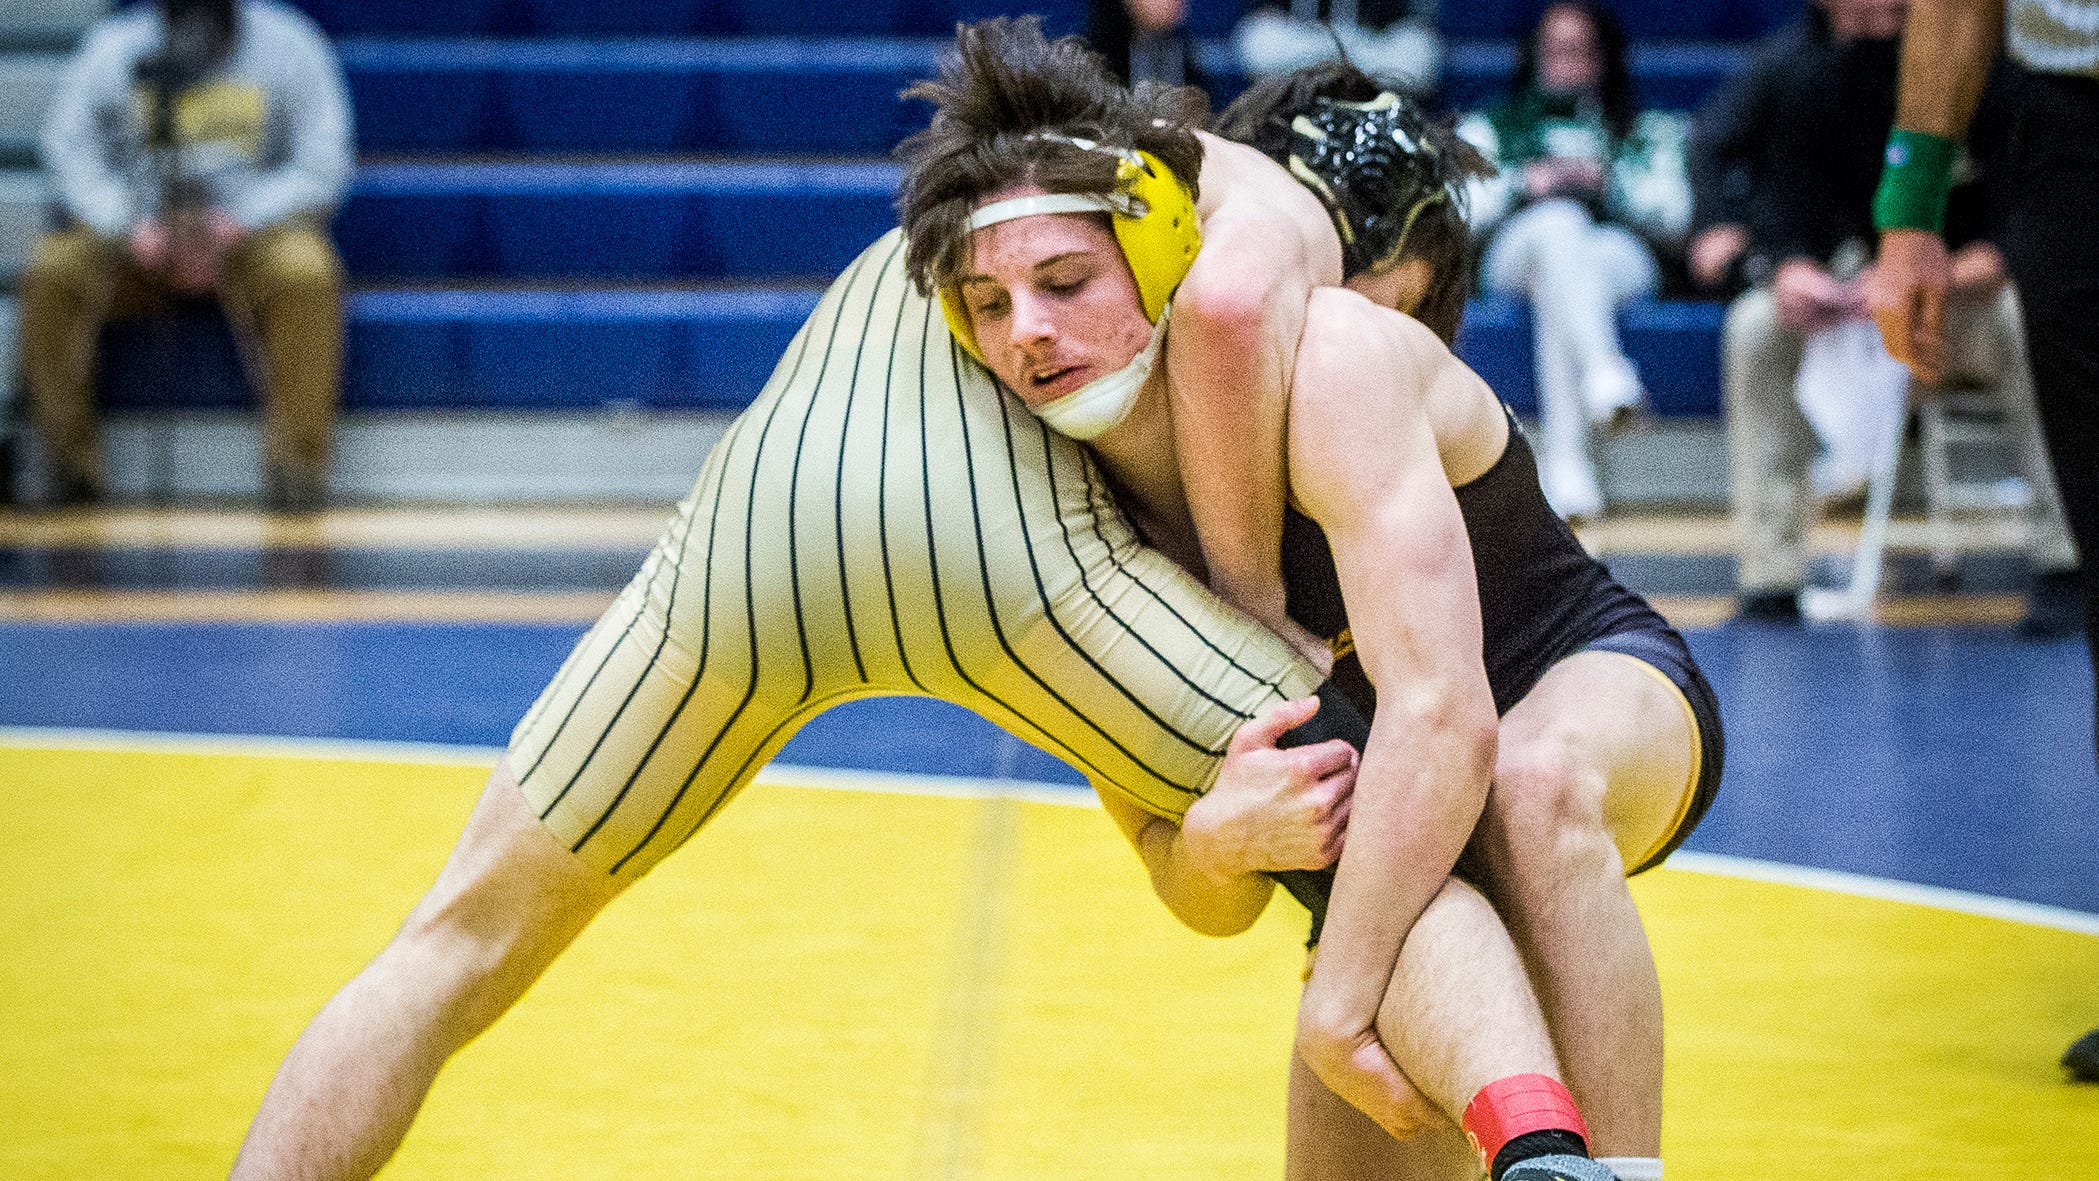 IHSAA wrestling Cowan wins first sectional title in program history